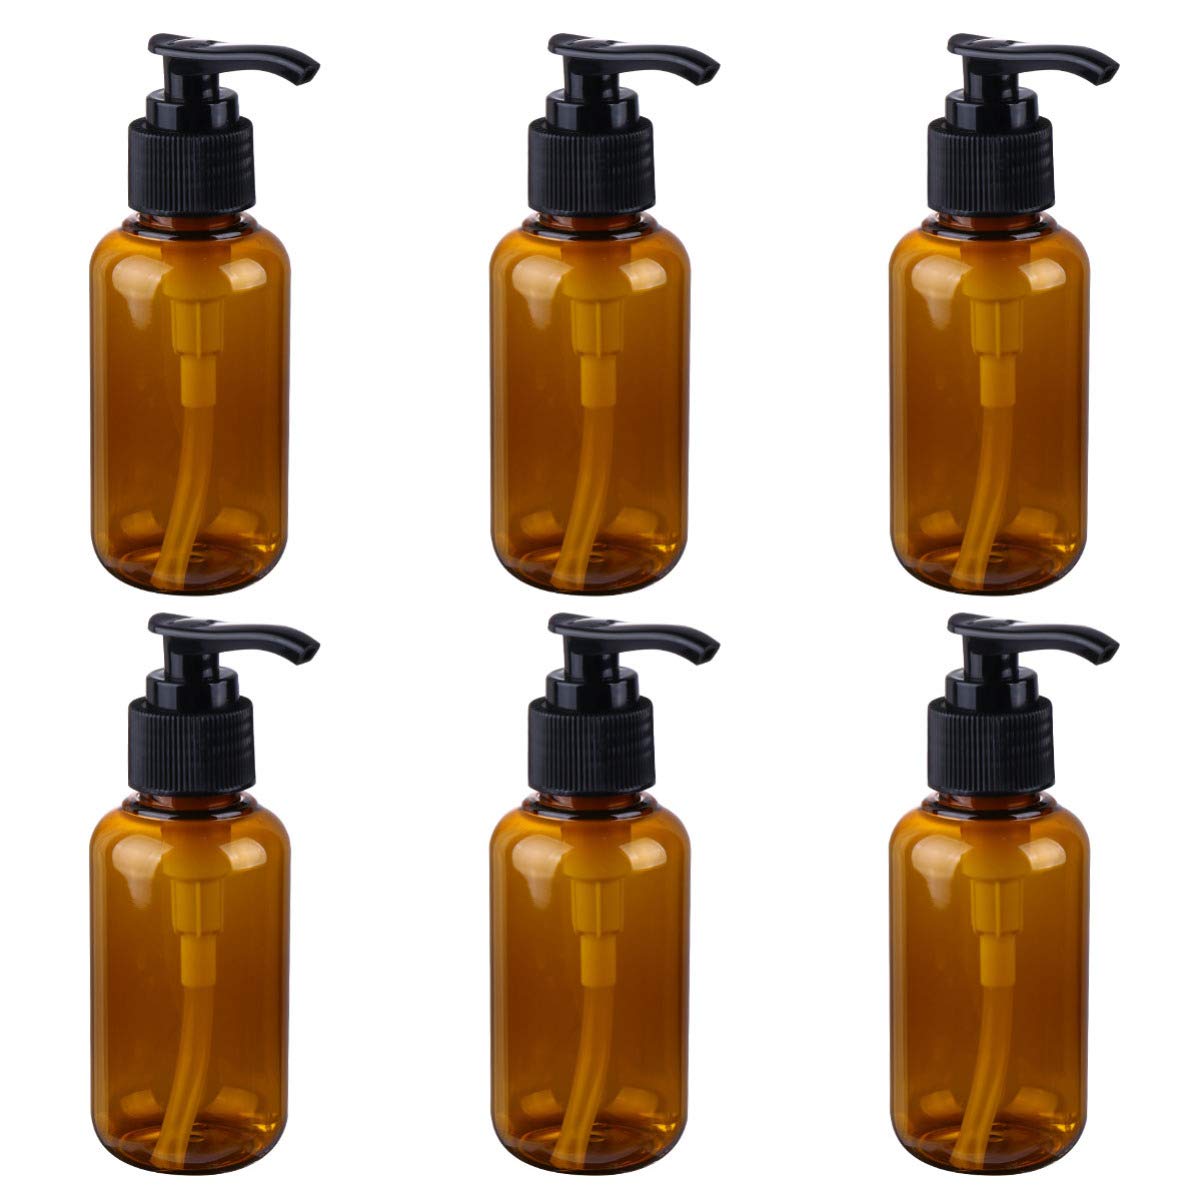 Lurrose 6Pcs 100ml Empty Plastic Pump Bottles Practical Pump Bottle Refillable Containers for Emulsion Shampoo or Body Wash (Brown)